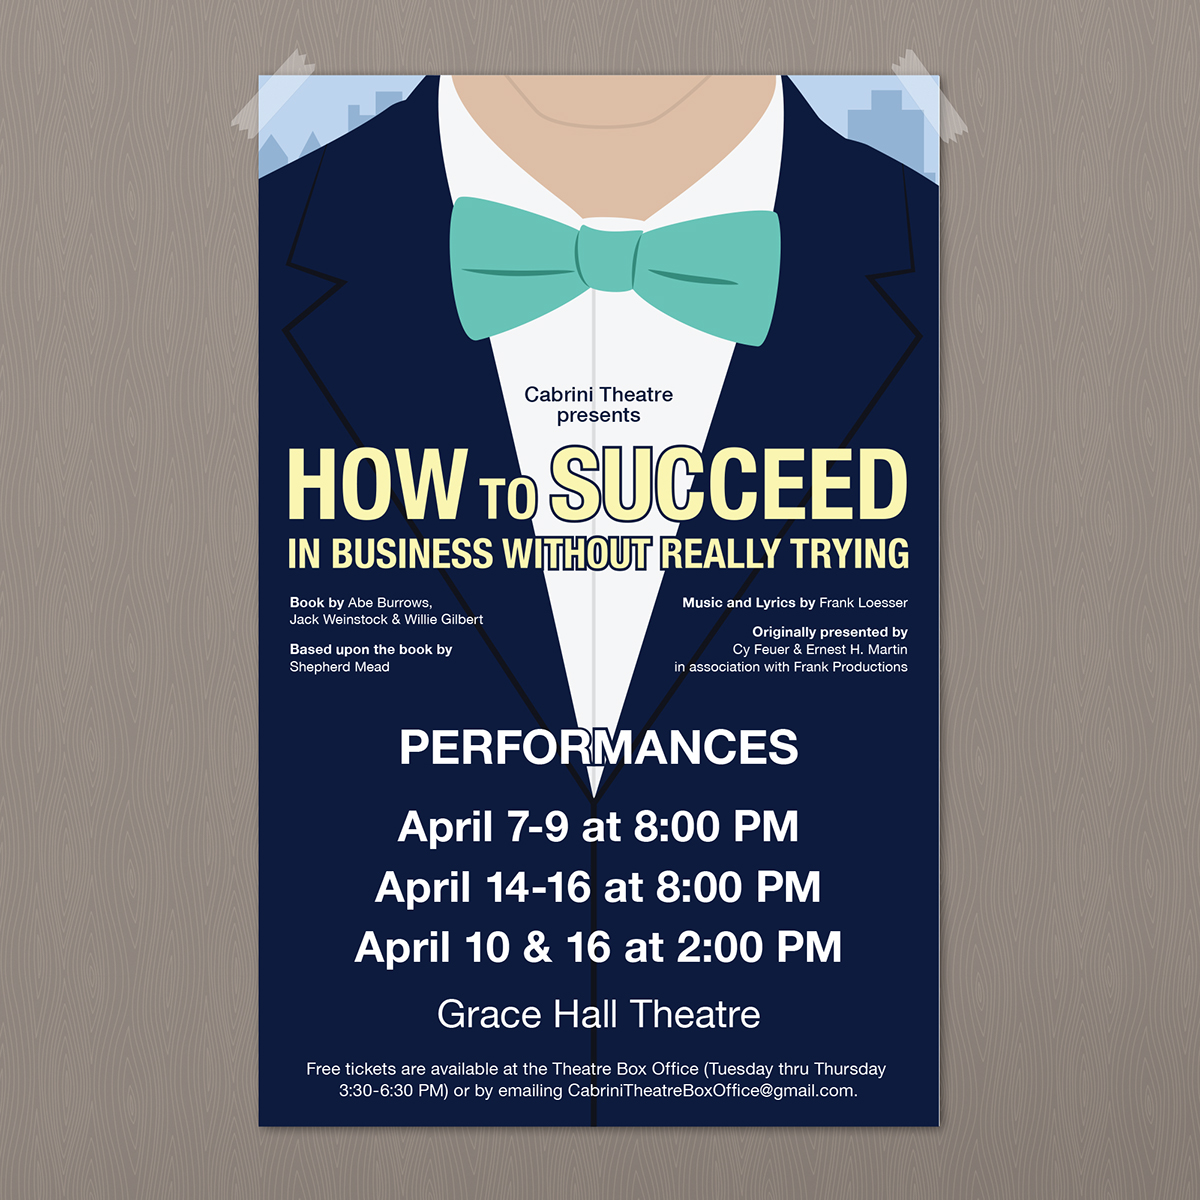 thetre theater  Musical how to succeed musicalpromotional props tickets poster instagram book